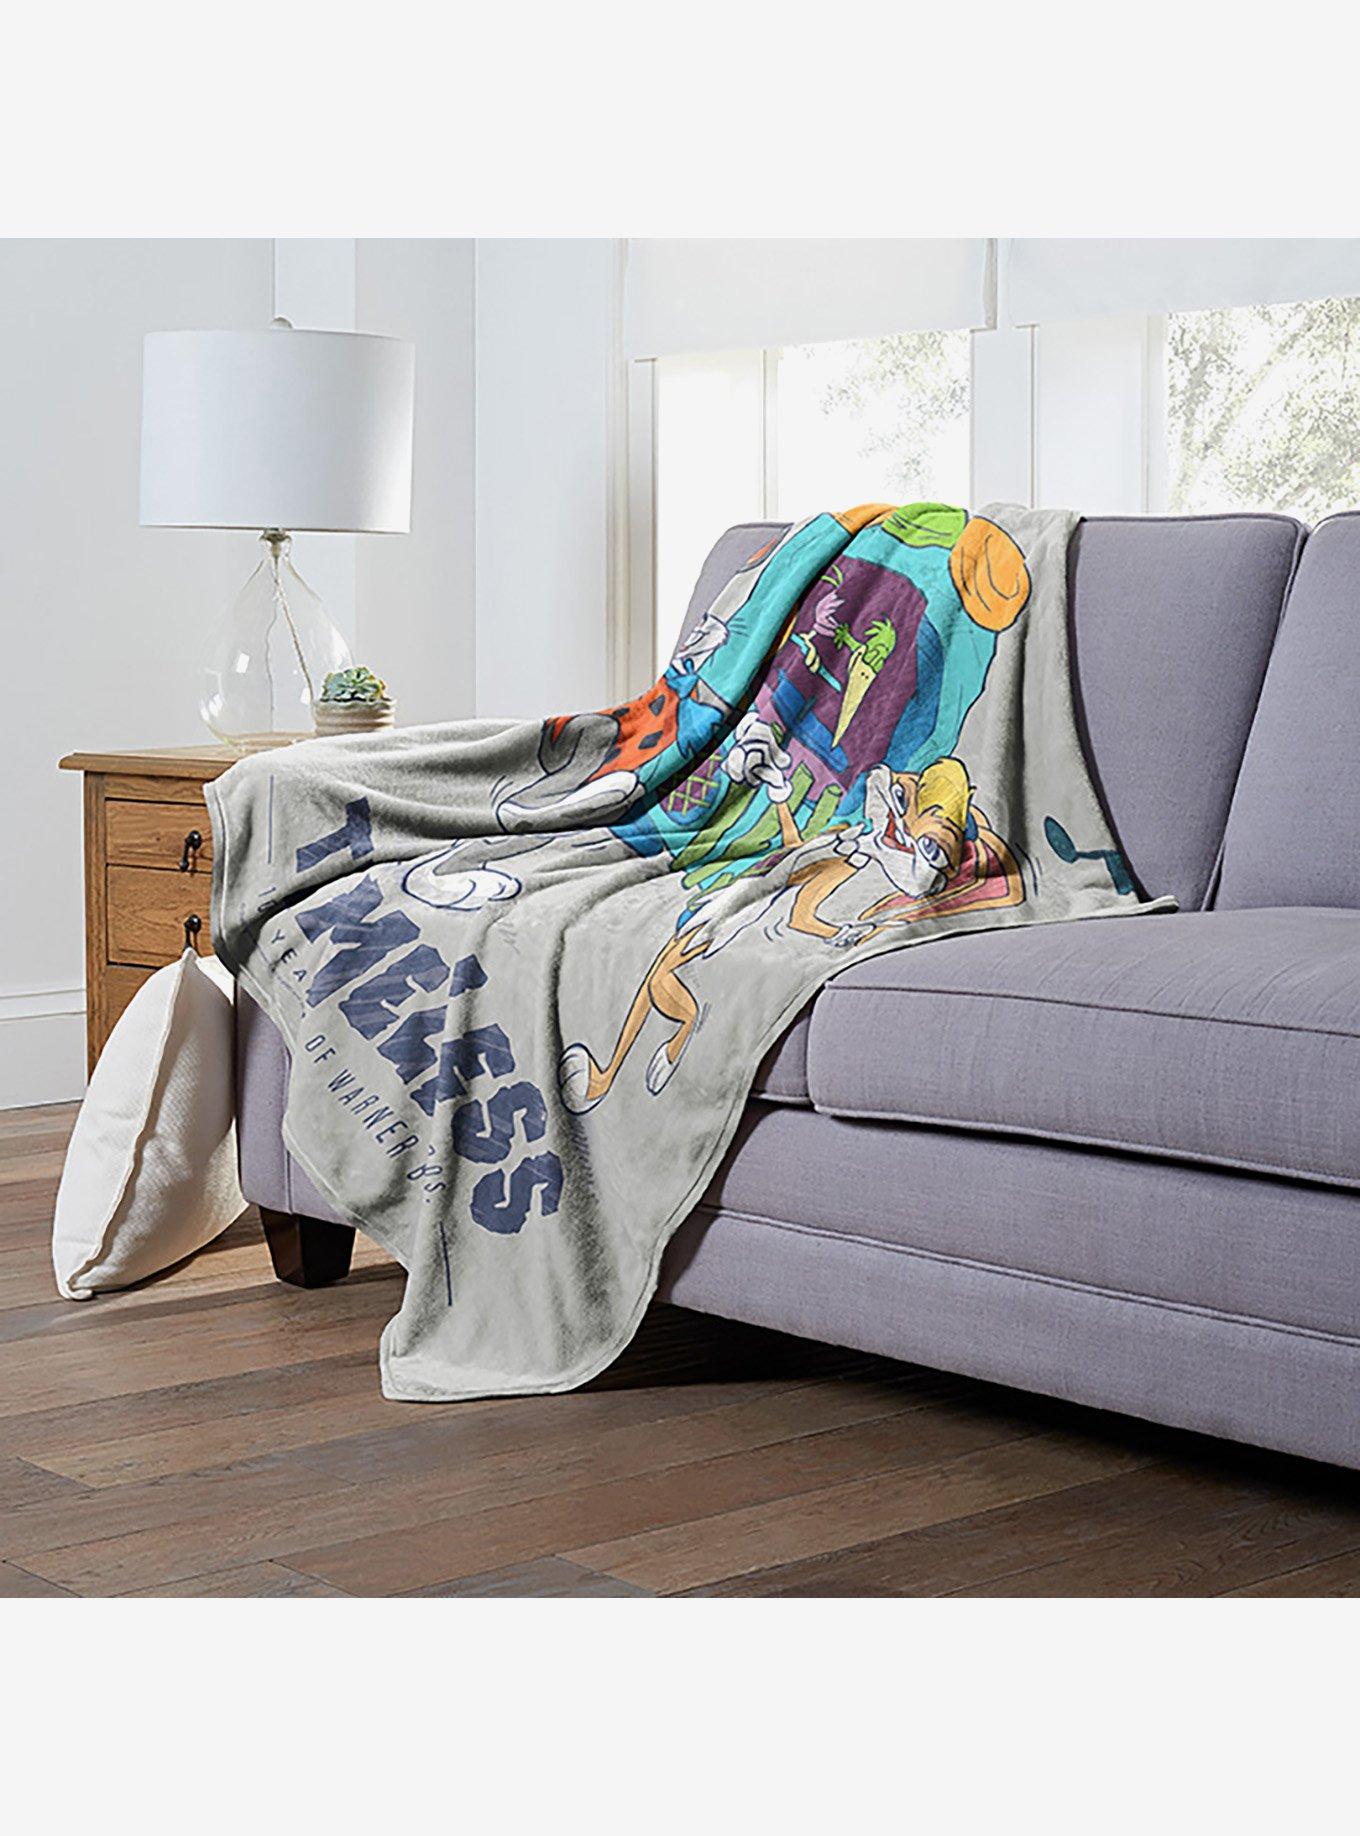 WB 100 Looney Tunes Timeless Silk Touch Throw, , alternate